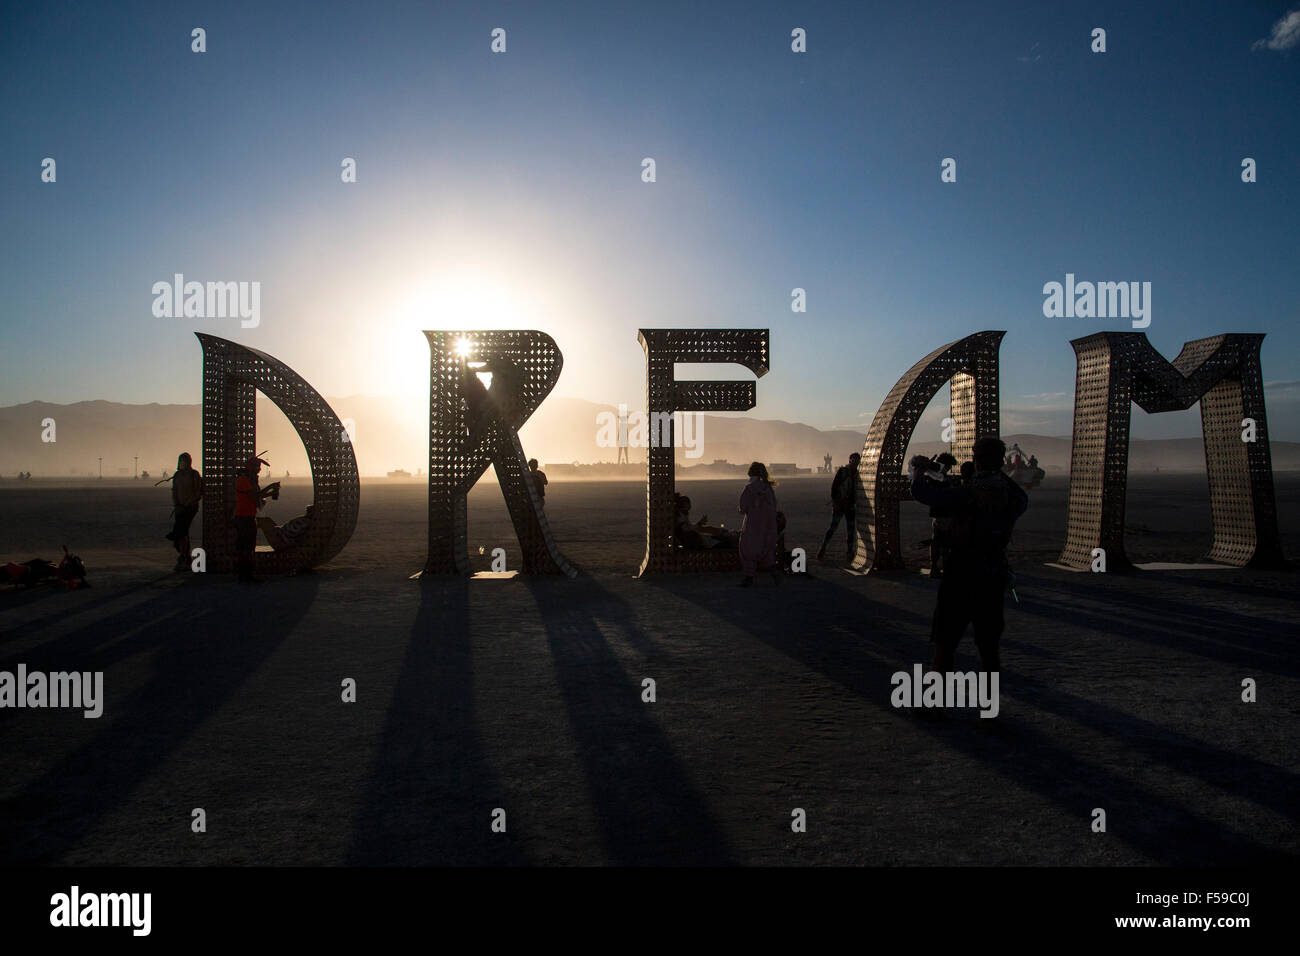 Dream art installation in the desert during the annual Burning Man festival September 1, 2015 in Black Rock City, Nevada. Burning Man's official art theme this year is 'Carnival of Mirrors' and is expected to be attended by 70,000 people for the week long event. Stock Photo